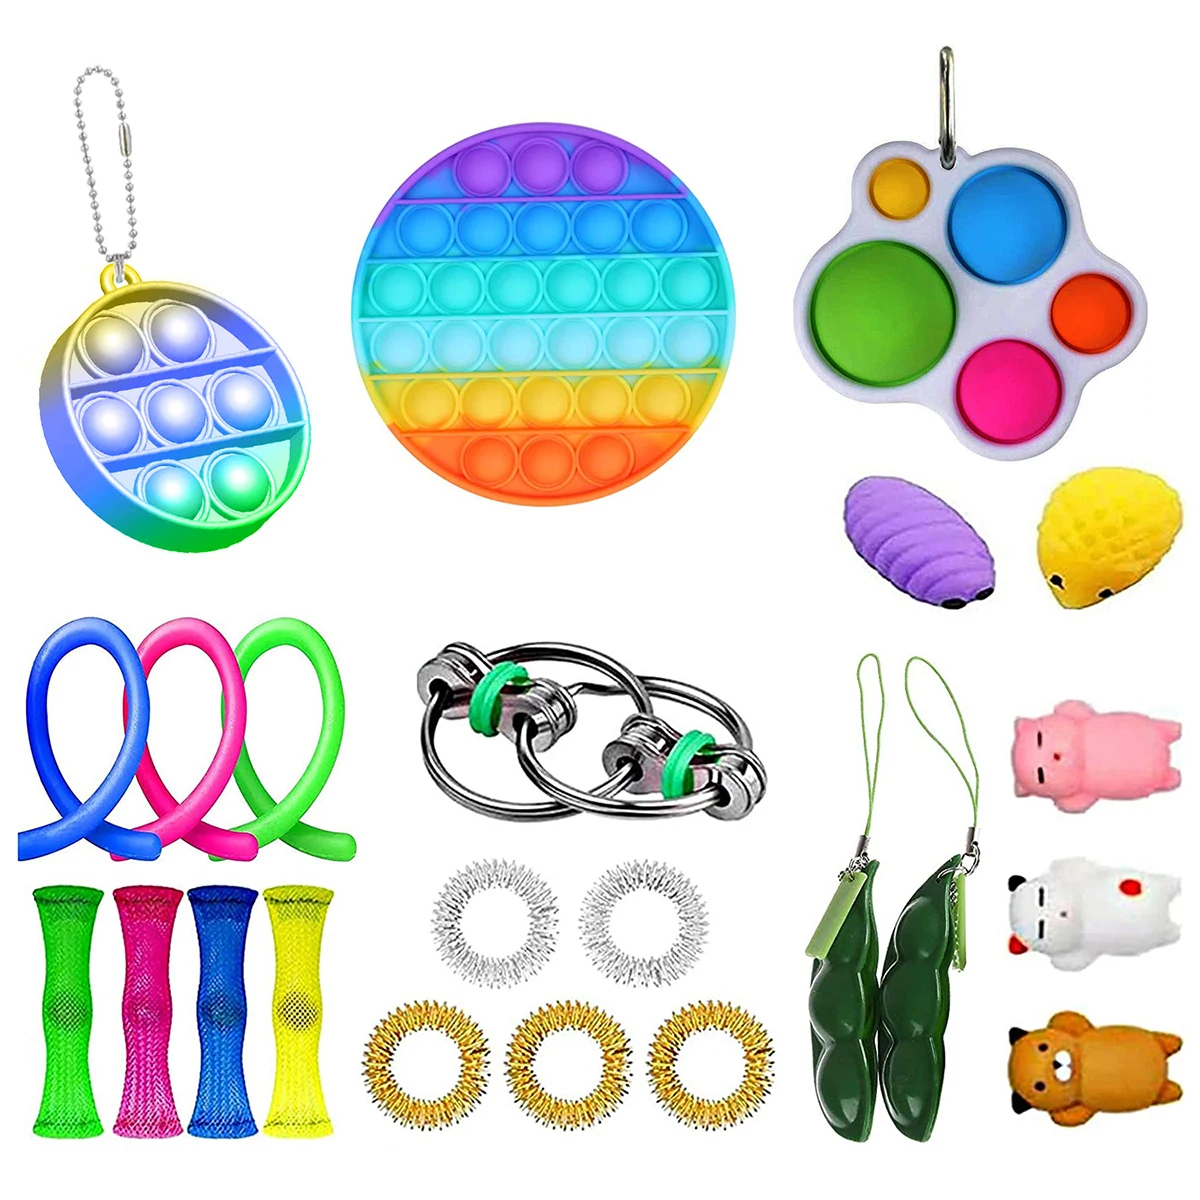 

27 Pack Fidget Sensory Toy Set Stress Relief Toys Autism Anxiety Relief Stress Pop Bubble Stress-relieving Toys For Kids Adults